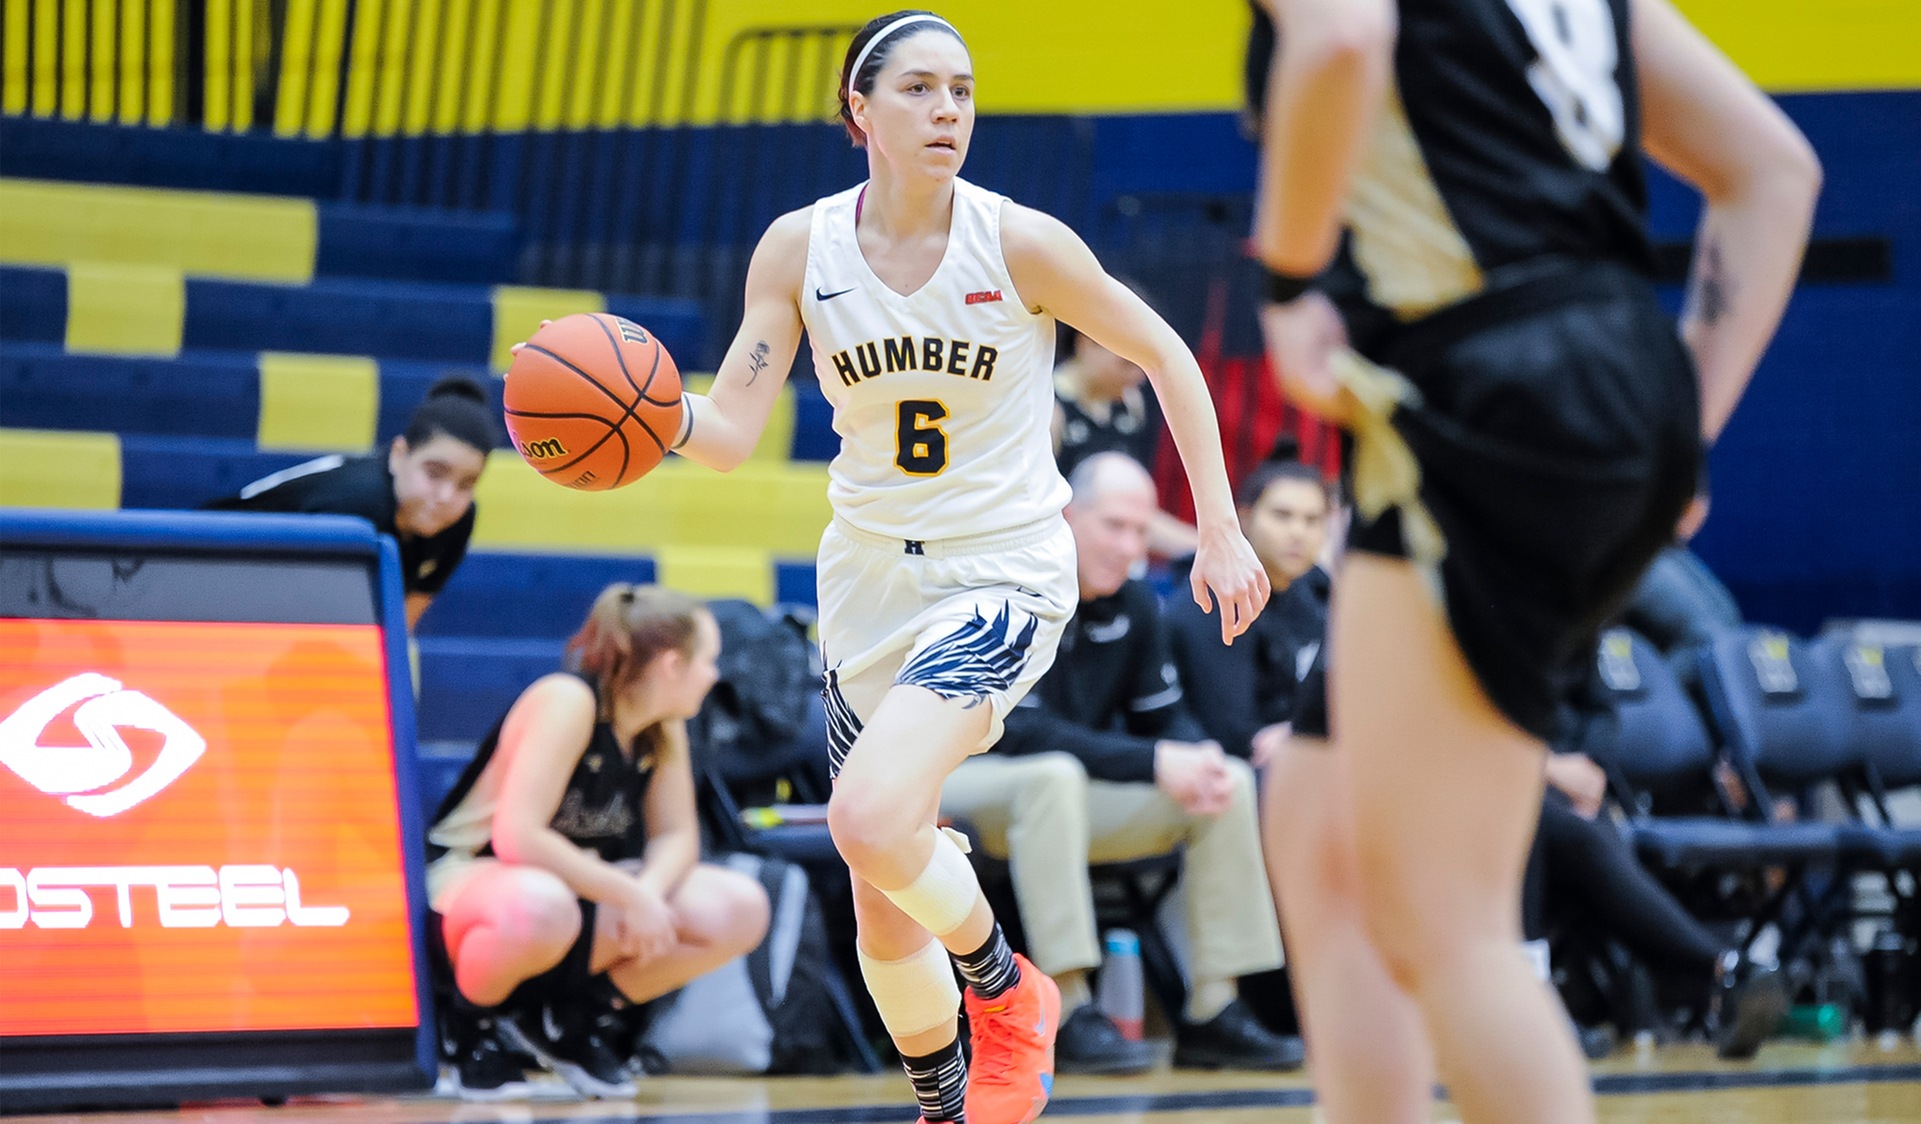 BENCH LEADS THE WAY IN No. 11 WOMEN'S BASKETBALL WIN OVER SAULT, 90-35